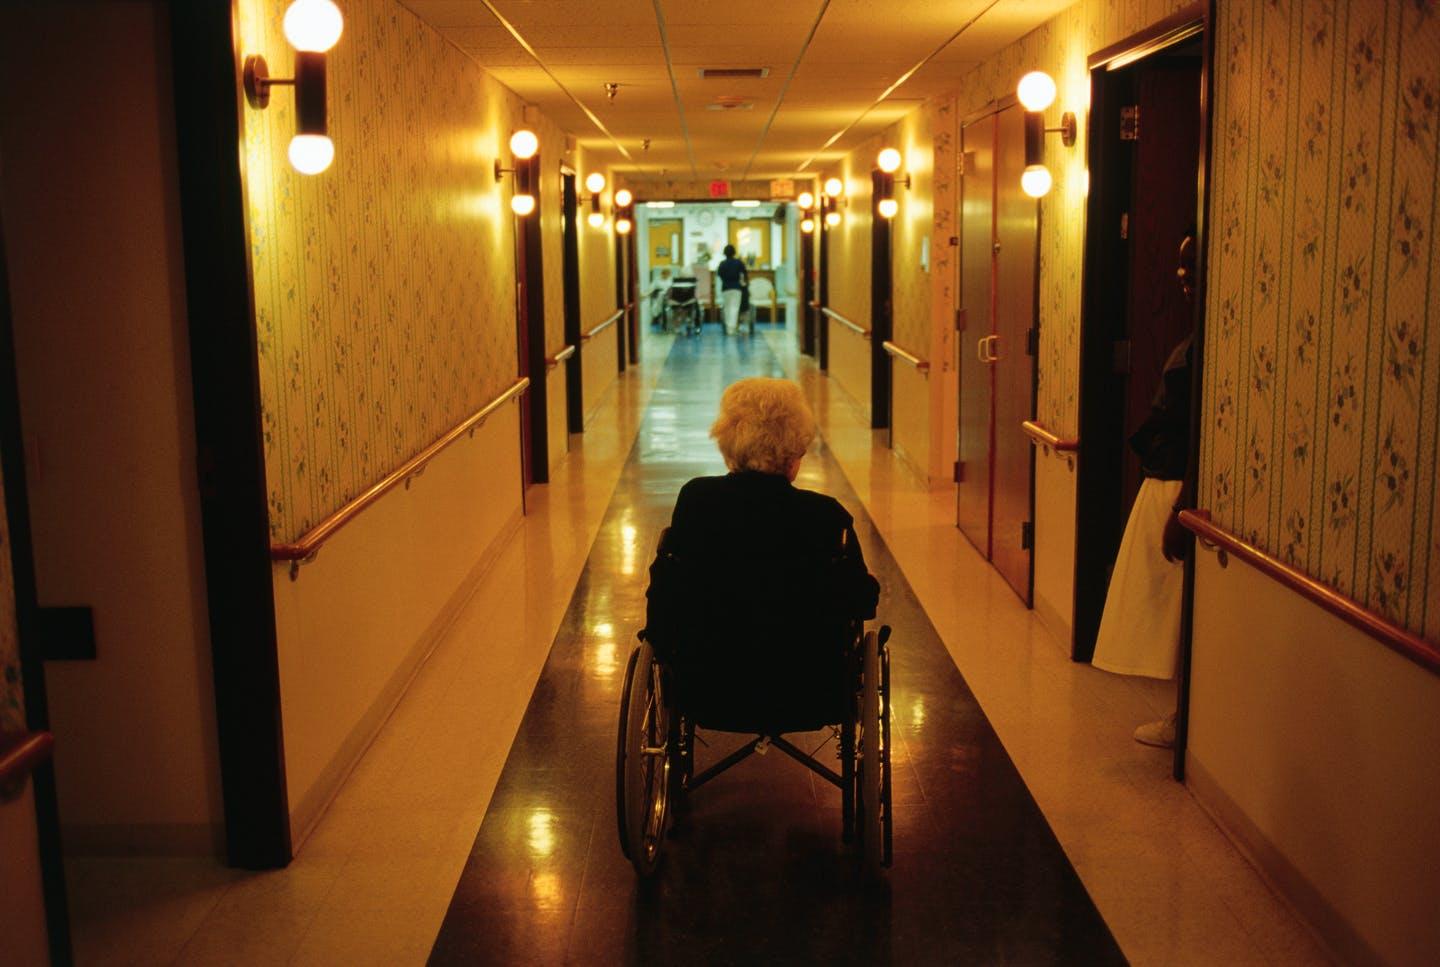 Nursing Home Residents And Staff Are Traumatized From The ...